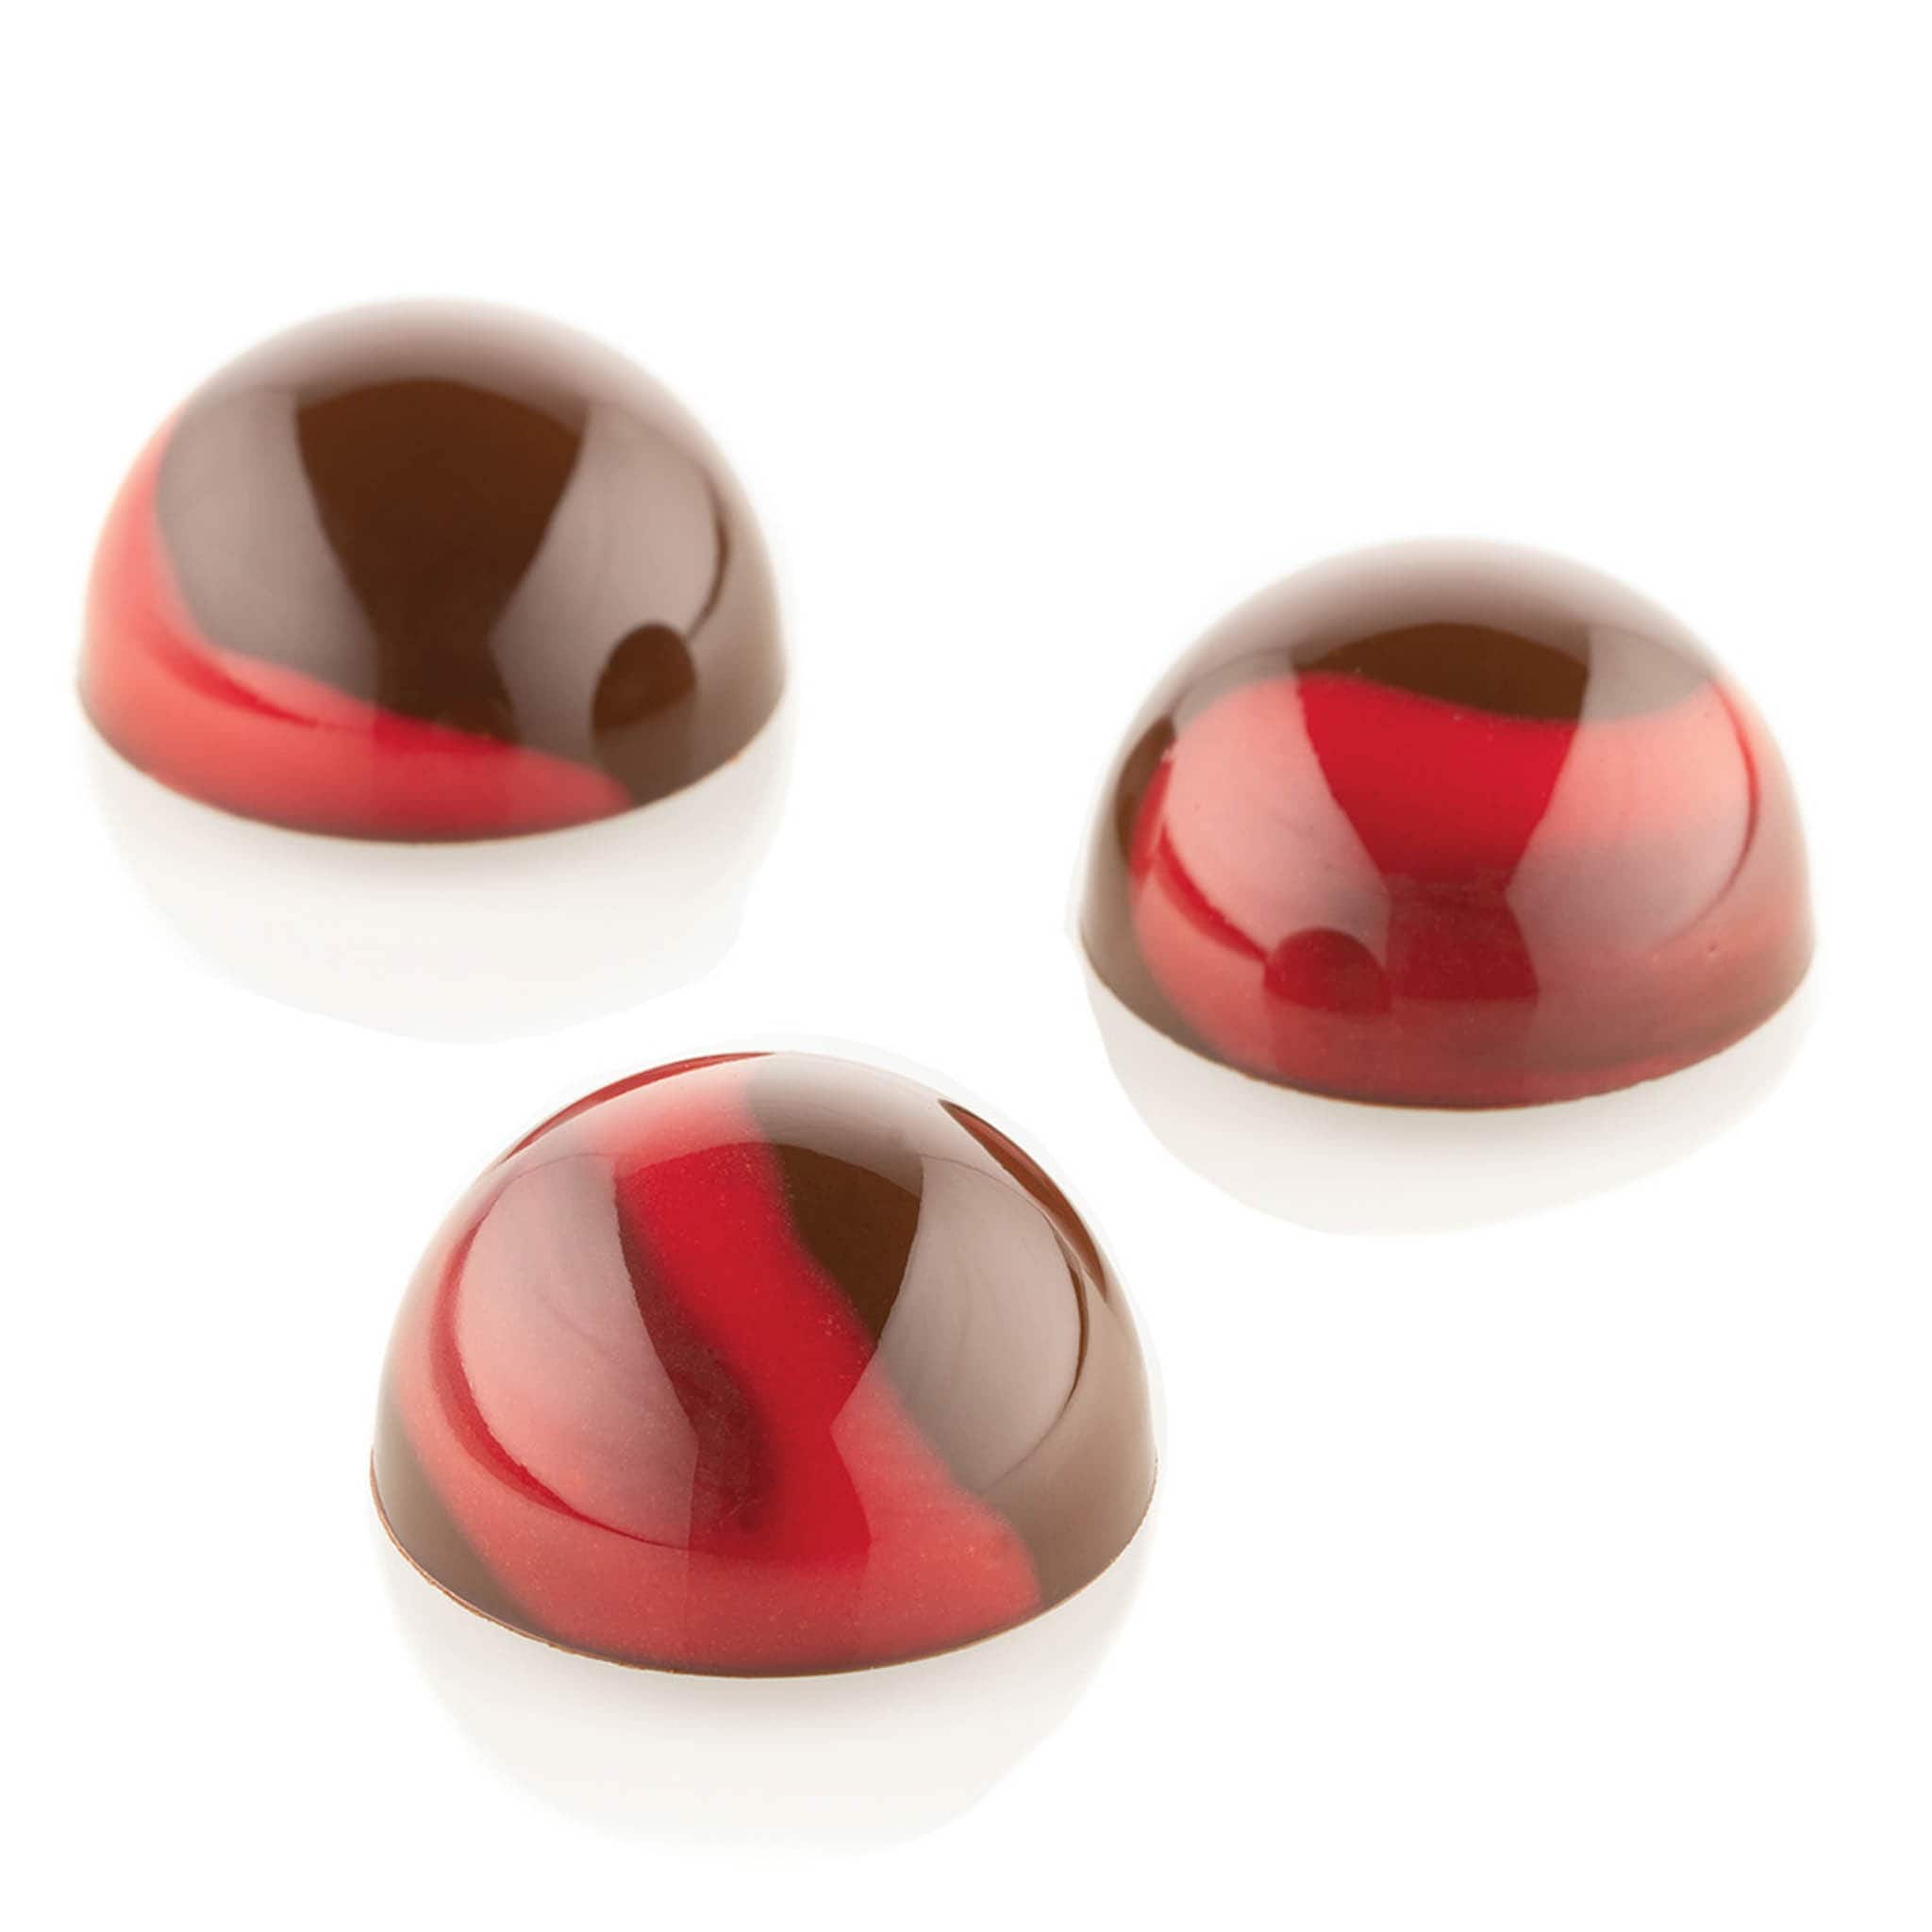 Silikomart Domed Tritan and Silicone Insert Chocolate Mould Set